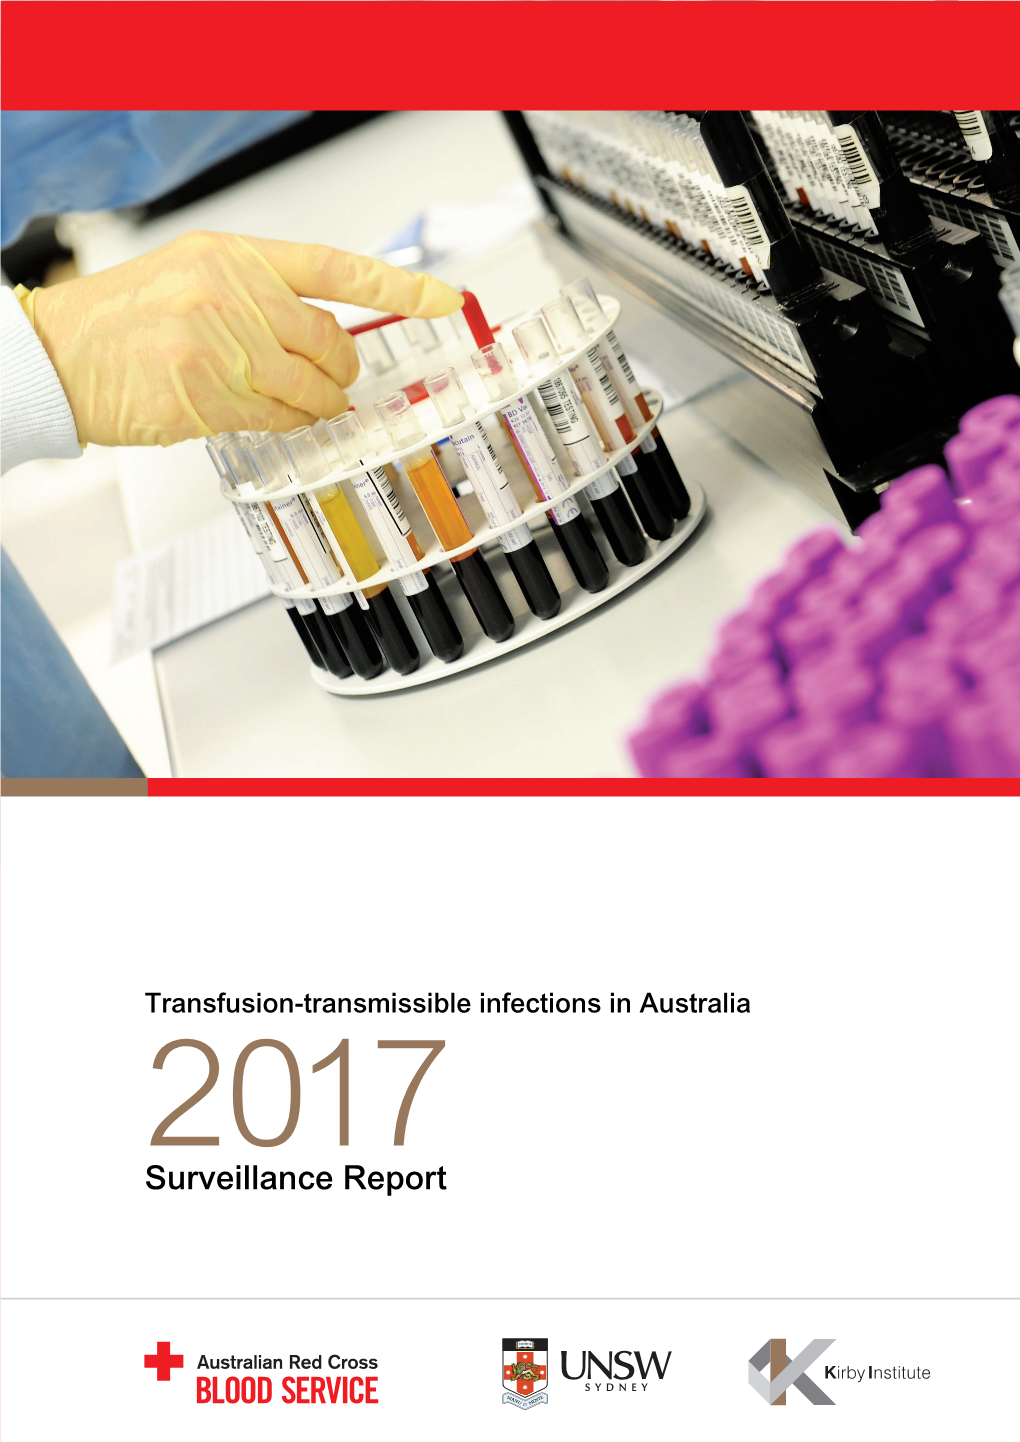 Transfusion-Transmissible Infections in Australia: 2017 Surveillance Report. Kirby Institute, UNSW Sydney, and the Australian Red Cross Blood Service; 2017